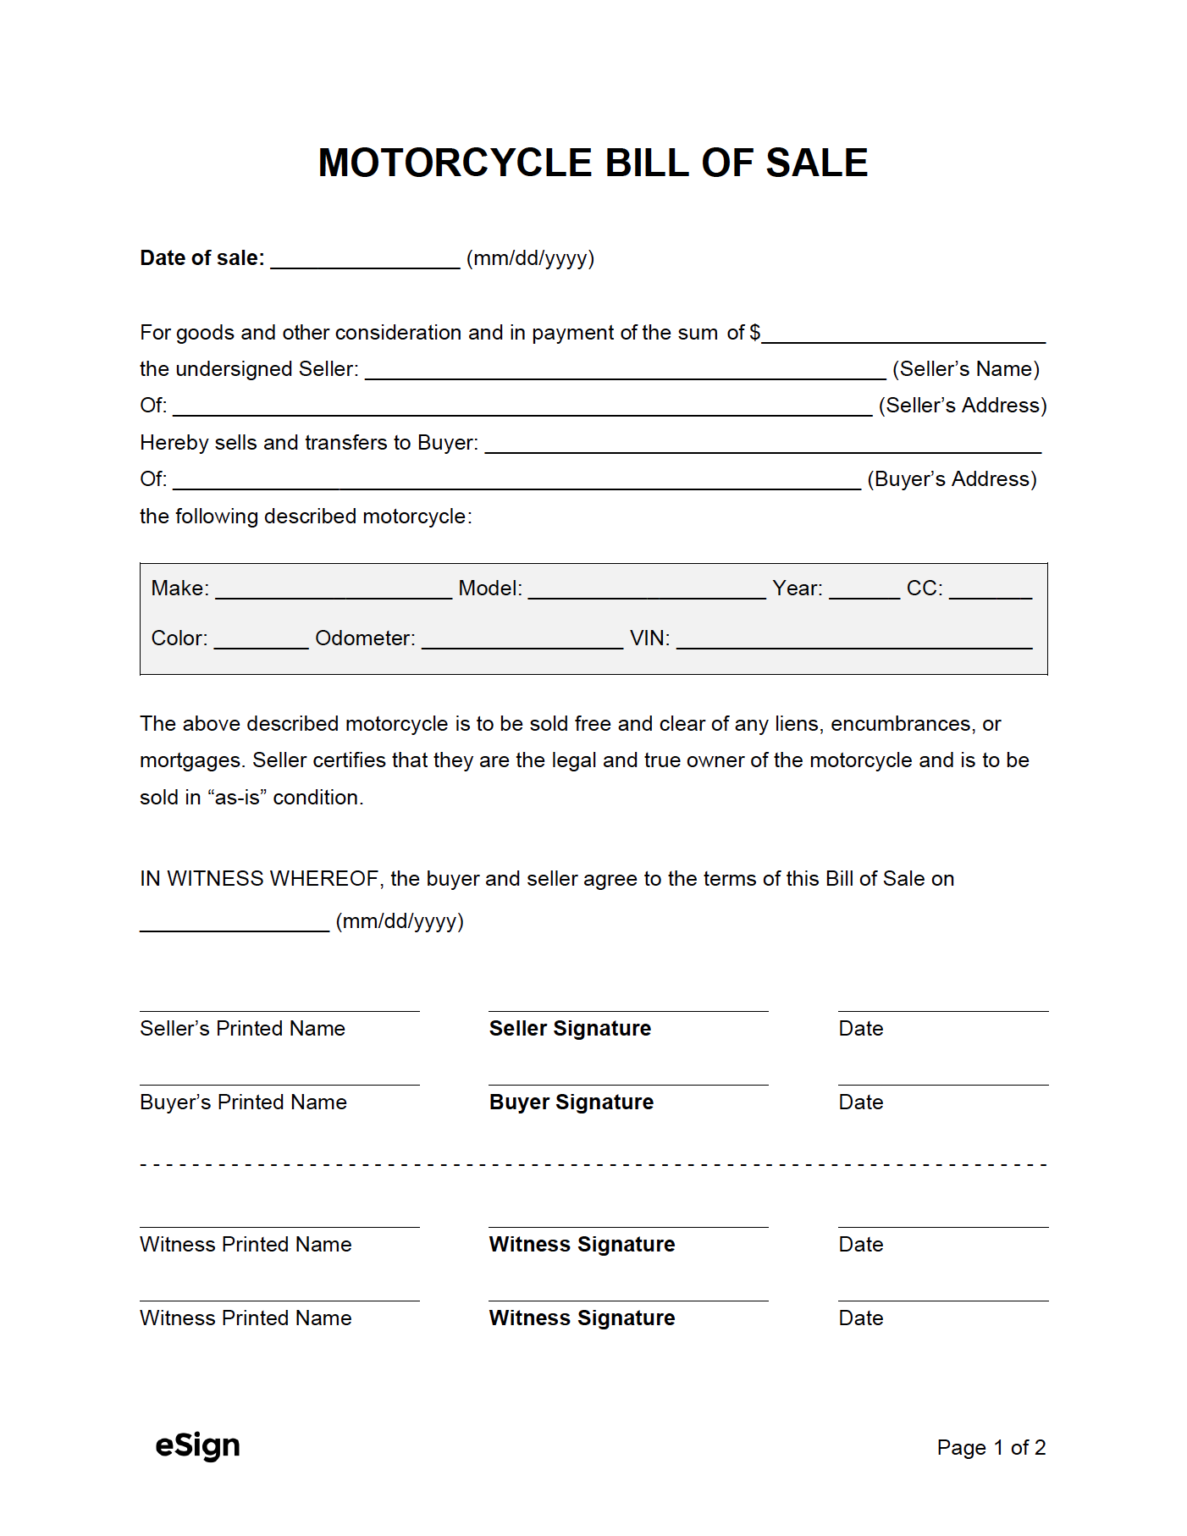 free-motorcycle-bill-of-sale-form-pdf-word